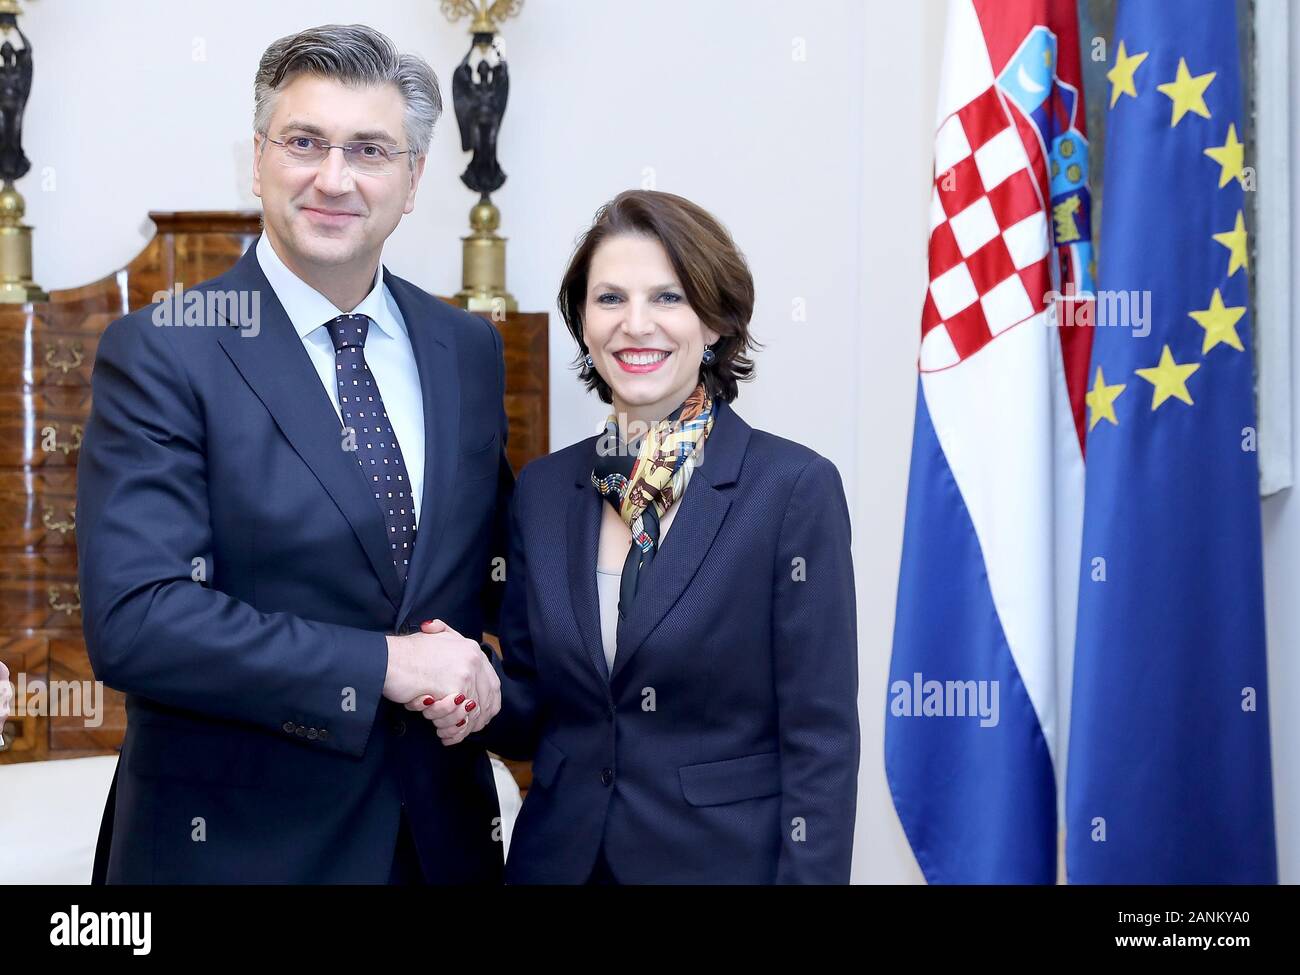 (200117) -- ZAGREB, Jan. 17, 2020 (Xinhua) -- Croatian Prime Minister Andrej Plenkovic (L) shakes hands with Austrian Federal Minister for European Affairs Karoline Edtstadler during their meeting in Zagreb, Croatia, on Jan. 17, 2020. Croatia and Austria will continue to push for a decision to open accession negotiations with Albania and North Macedonia at European Council level in March, Croatian Prime Minister Andrej Plenkovic and Austrian Federal Minister for European Affairs Karoline Edtstadler said here at a meeting on Friday. (Patrik Macek/Pixsell via Xinhua) Stock Photo